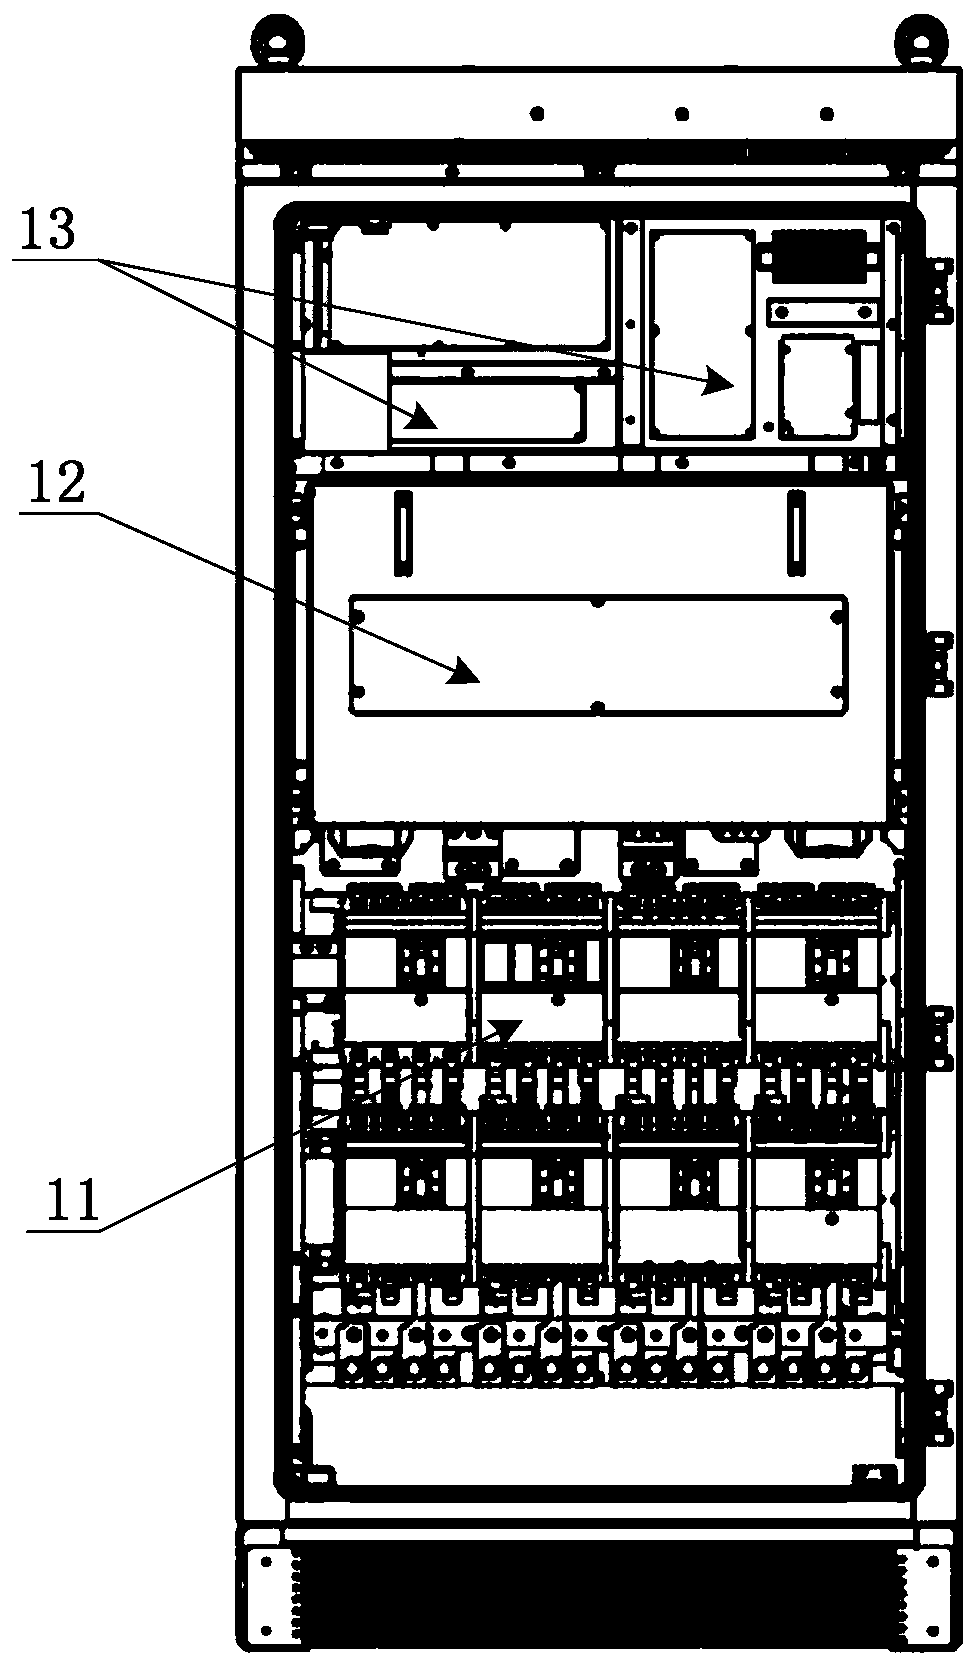 Outdoor inverter unit capable of realizing multi-machine parallel connection